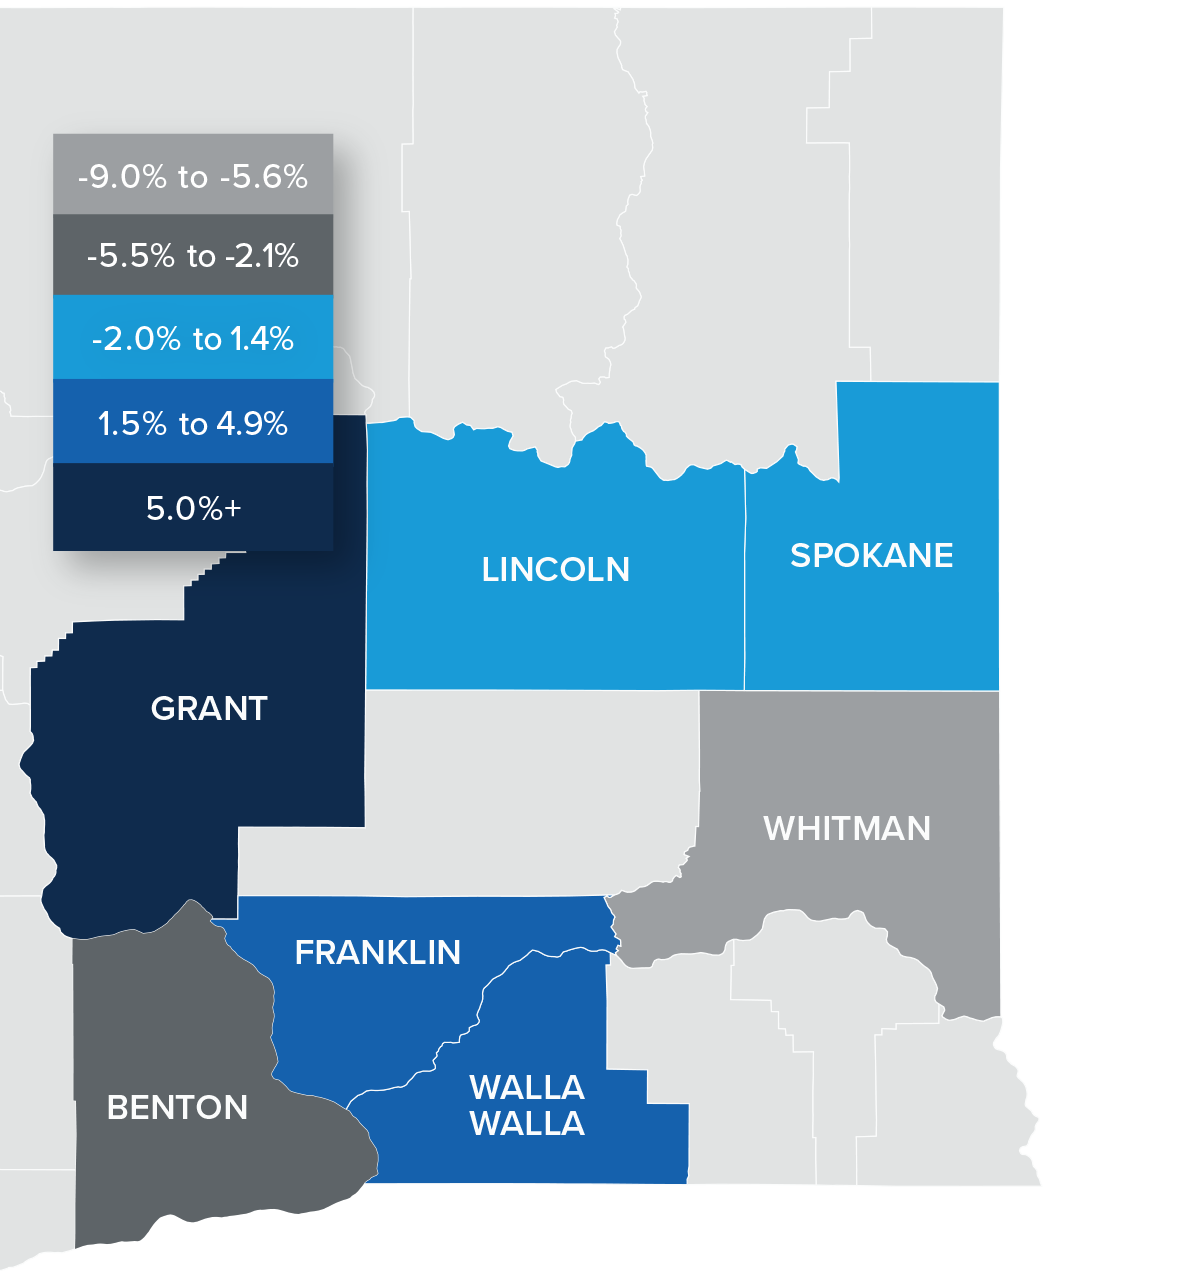 A map showing the real estate home prices percentage changes for various counties in Eastern Washington. Different colors correspond to different tiers of percentage change. Grant County had a change of more than 5% and is represented in the corresponding navy color. Franklin and Walla Walla were in the 1.5-4.9% range. Lincoln and Spokane were in the -2% to 1.4% range. Benton County was in -5.5% to -2.1% range. Whitman was in the -5.6% to -9% range and is represented in the light grey color on the map.